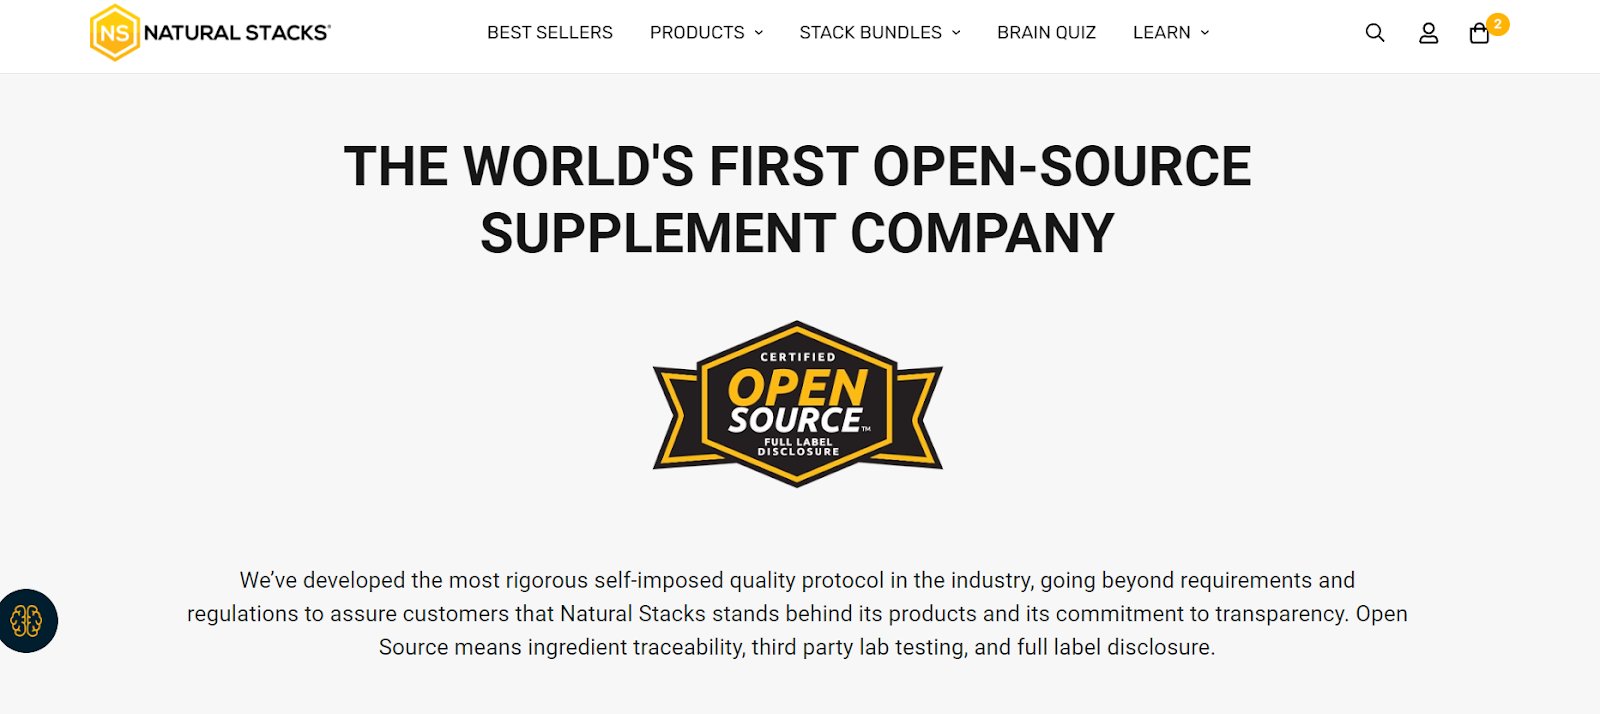 THE WORLD'S FIRST OPEN-SOURCE SUPPLEMENT COMPANY